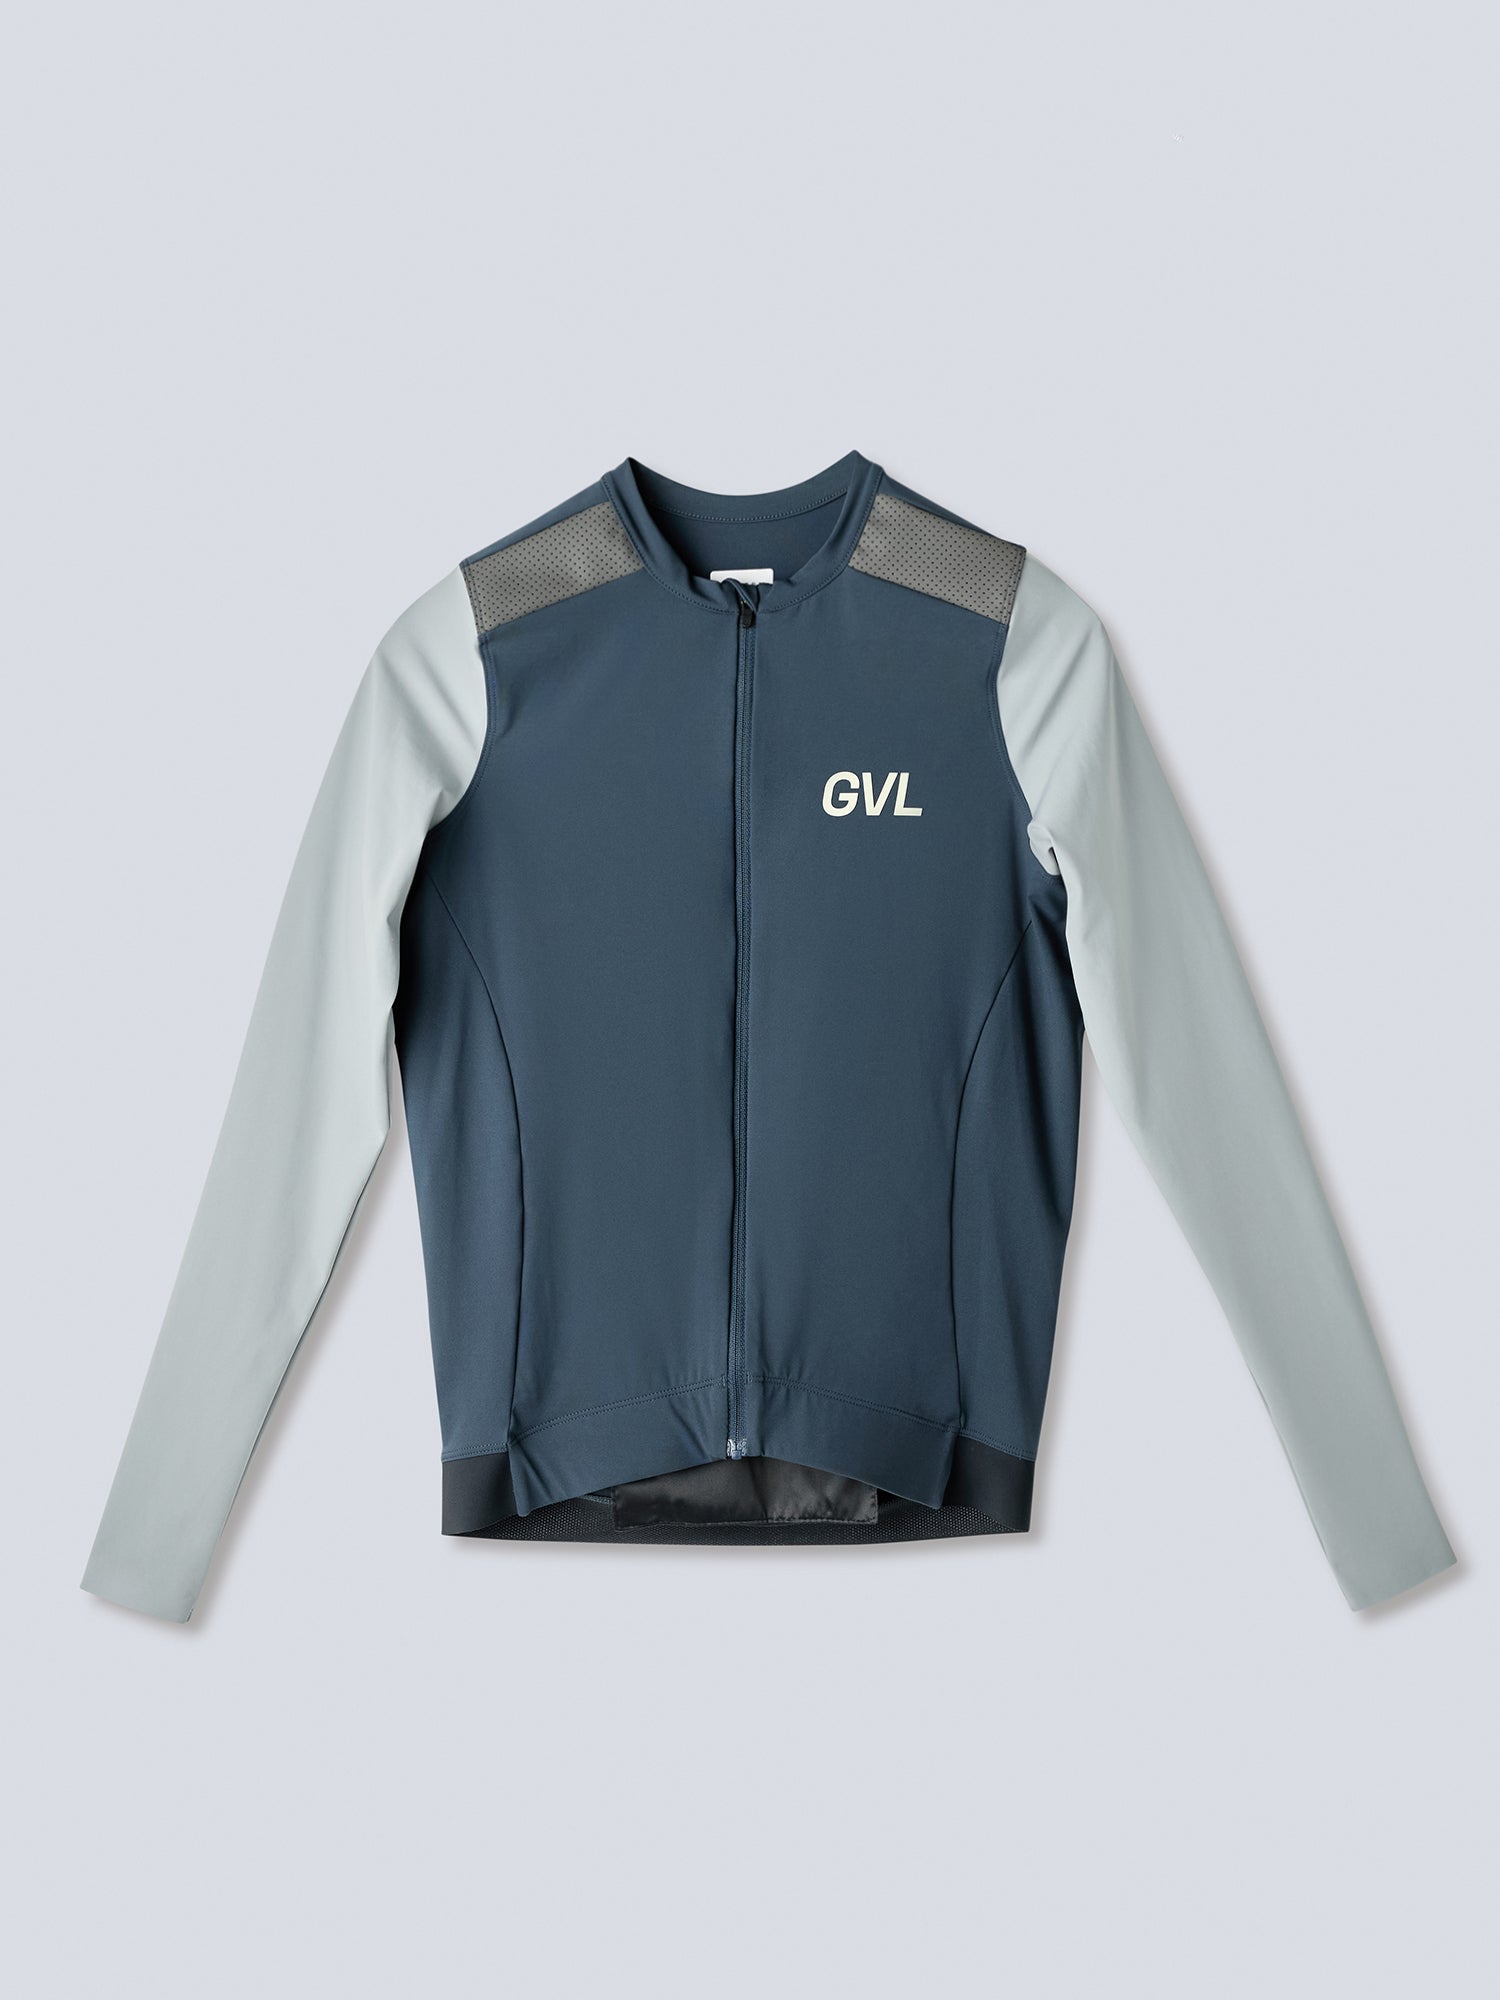 Givelo Jersey Modern Classic Long Sleeves Men's